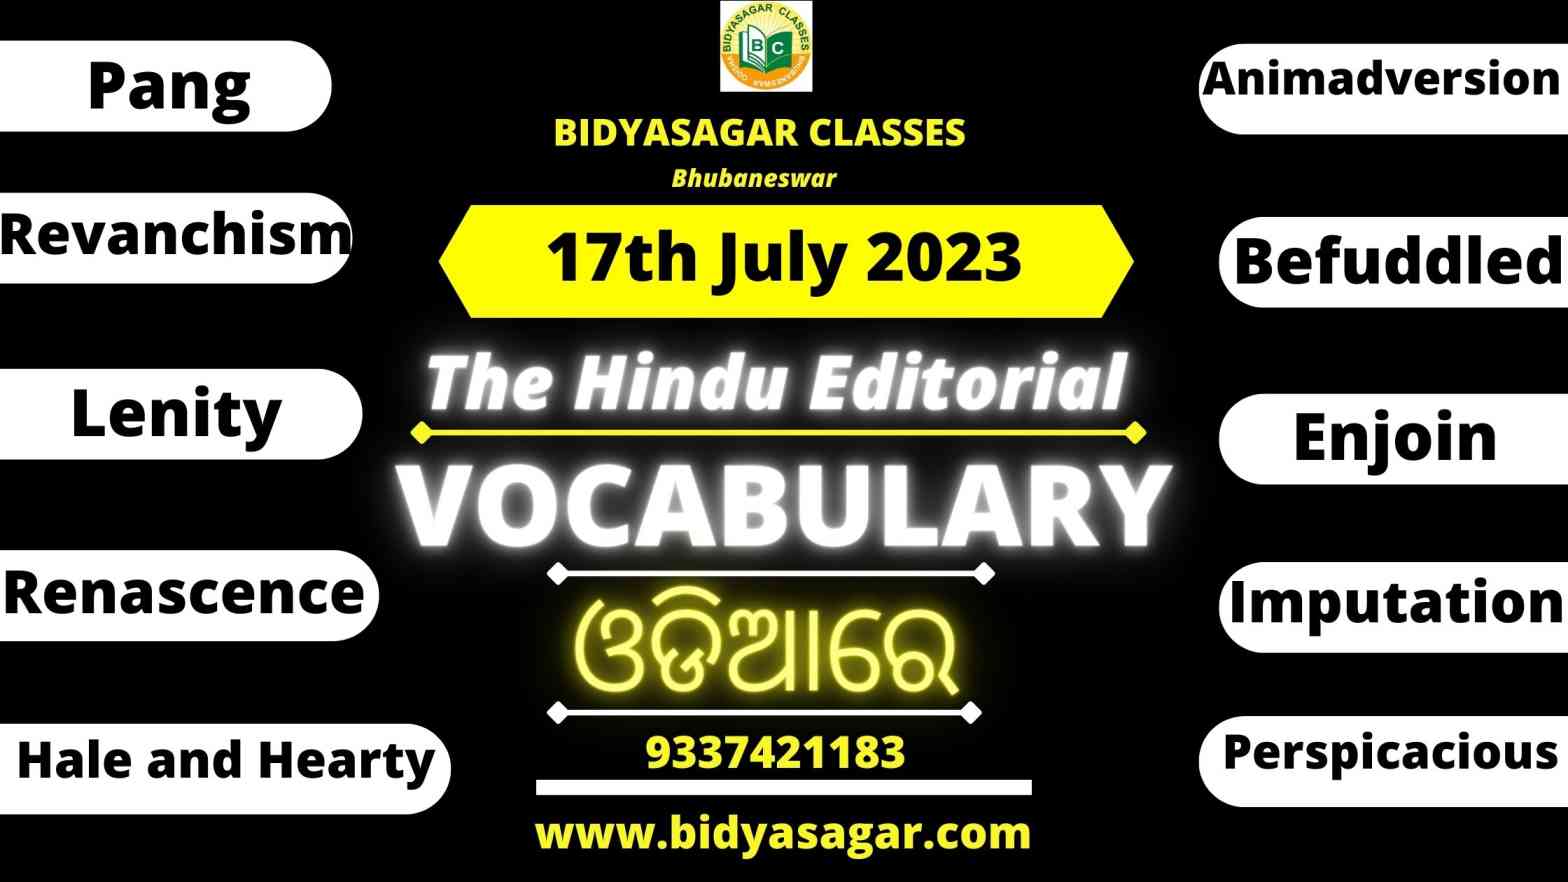 The Hindu Editorial Vocabulary of 17th July 2023